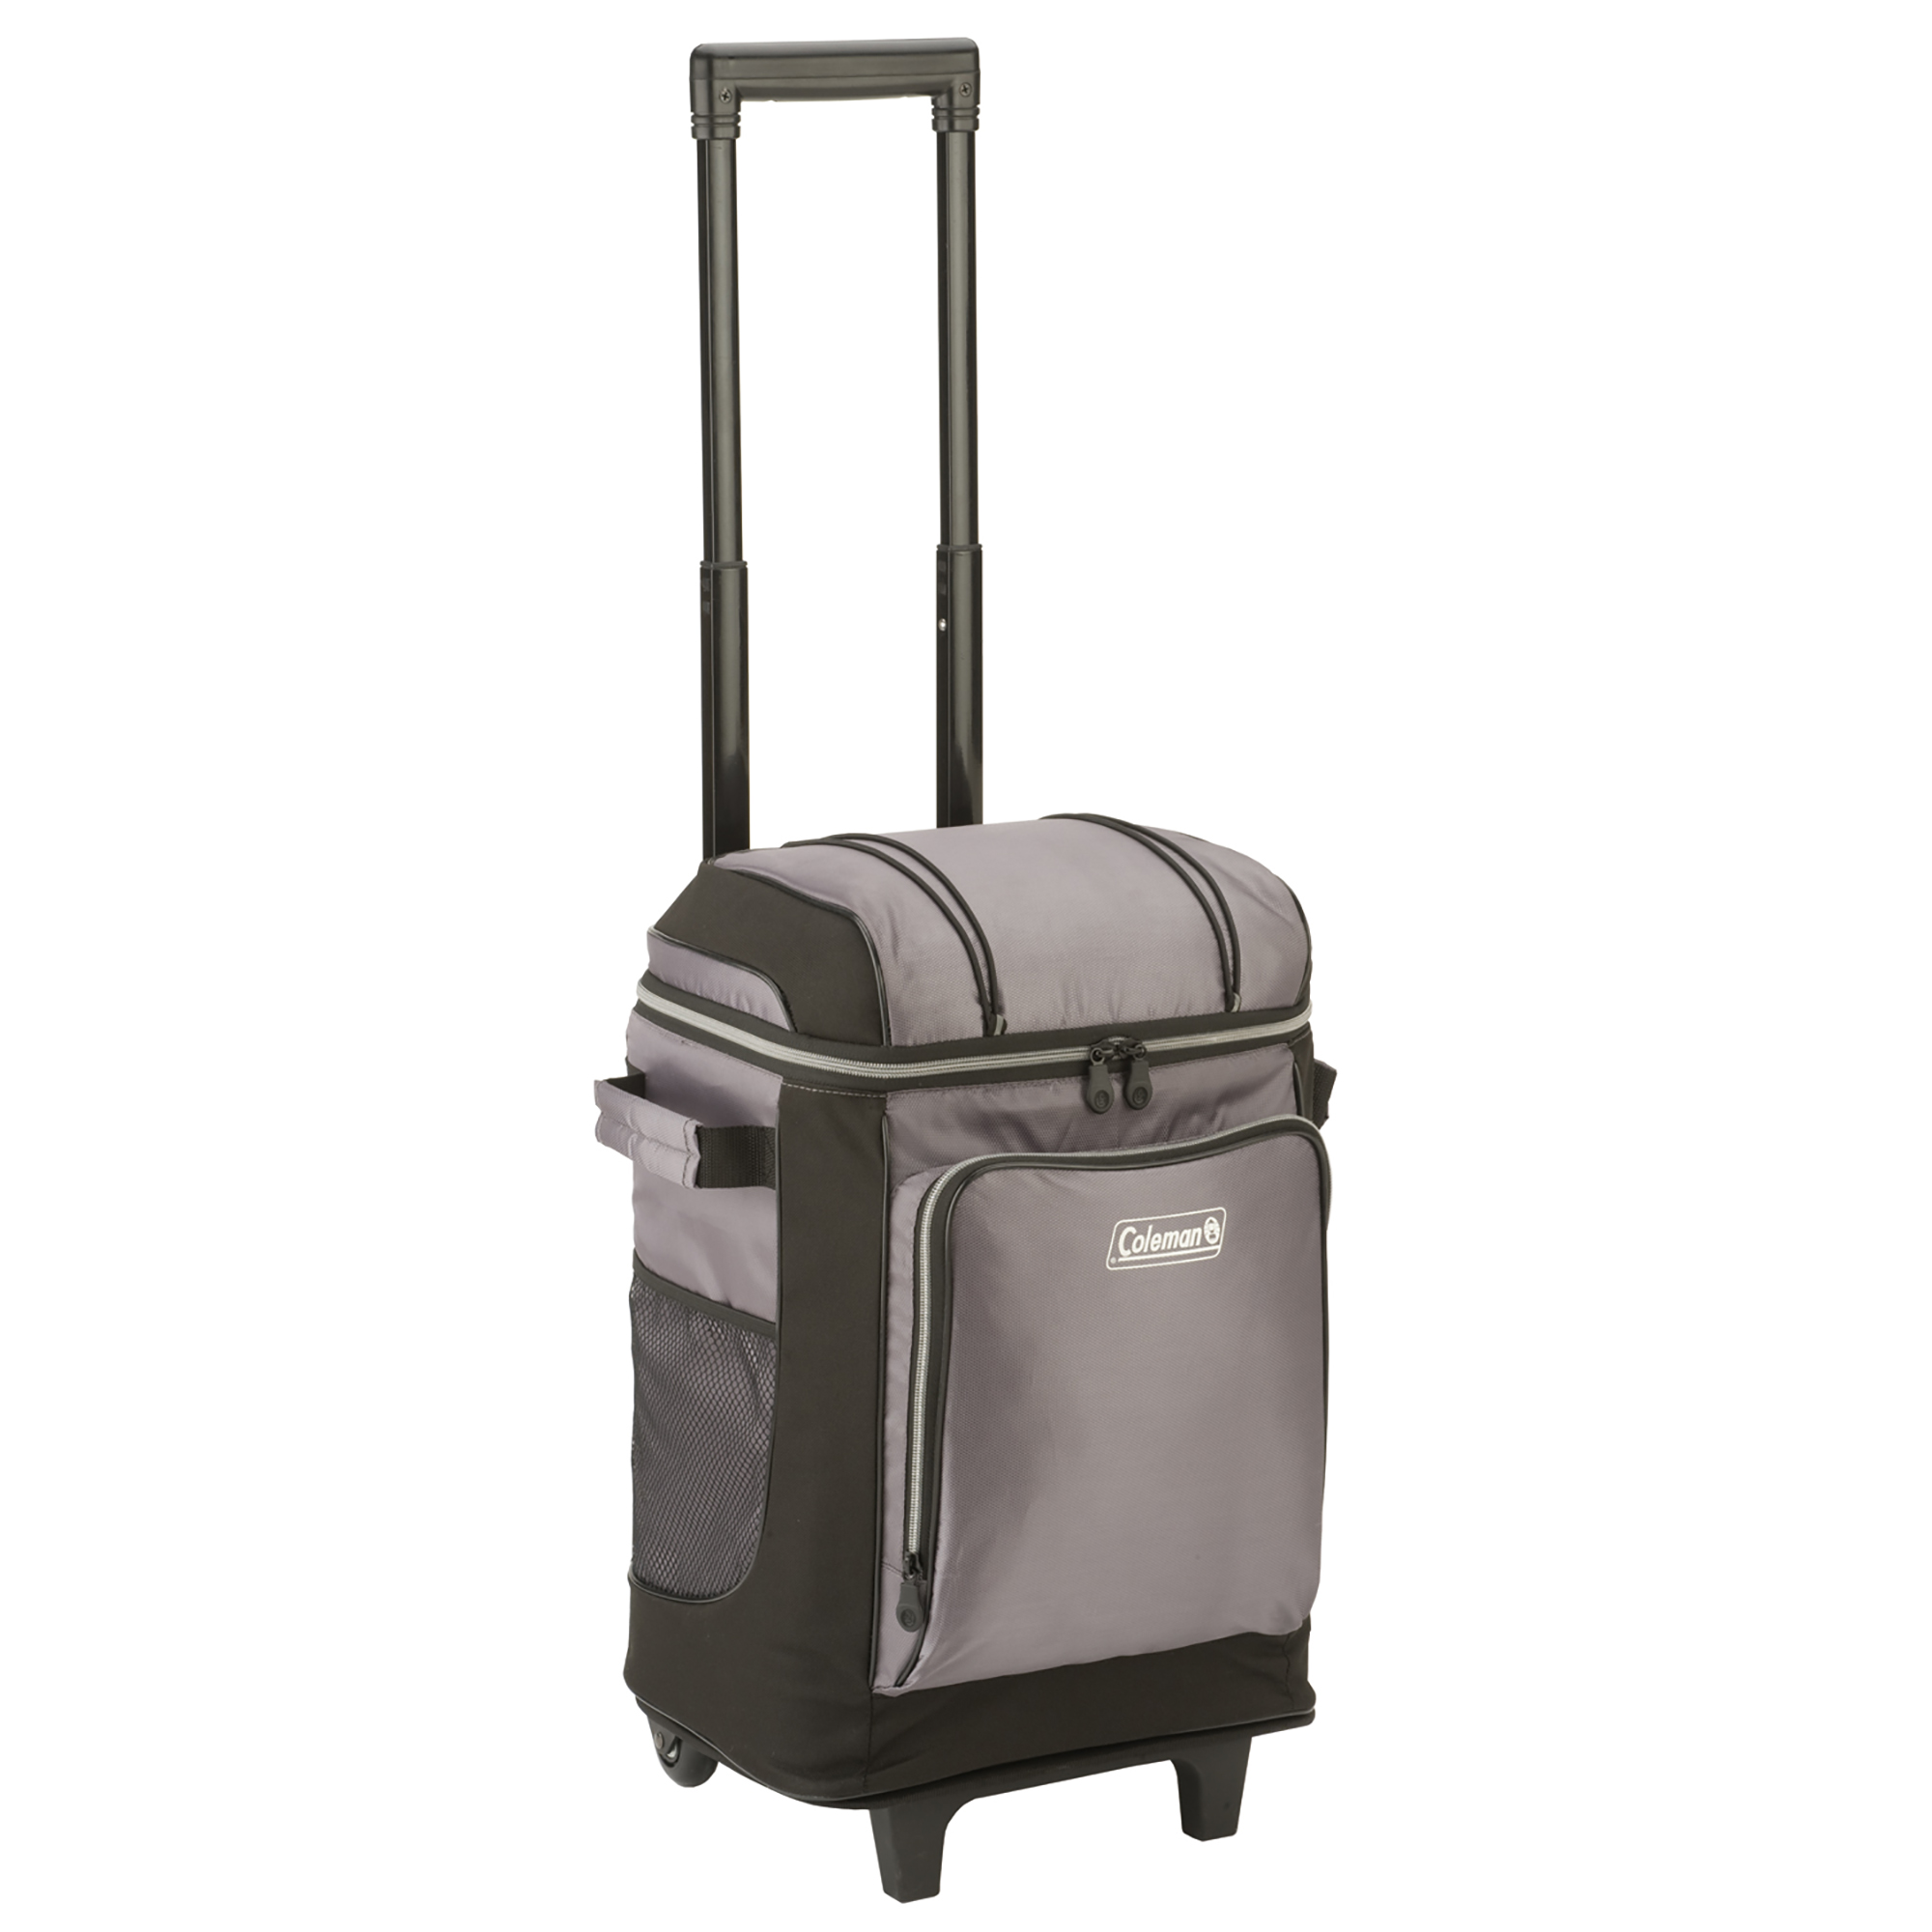 Coleman 42 Can Hard Sided Soft Cooler w/ Wheels $27.77 + s/h at Walmart